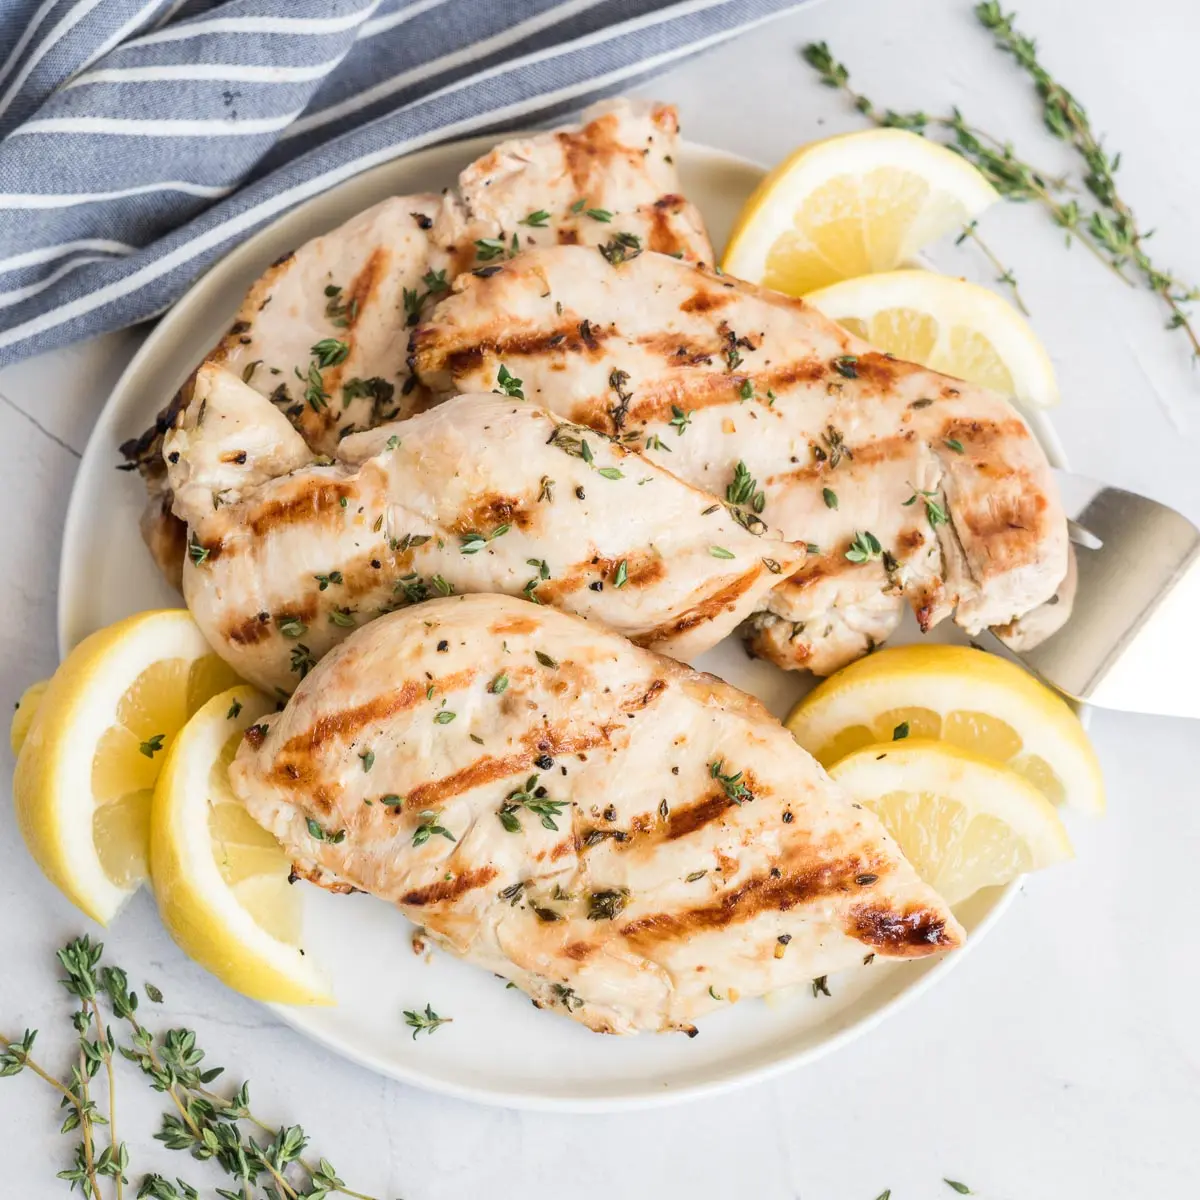 Grilled-lemon-herb-chicken-recipe-for-weight-loss